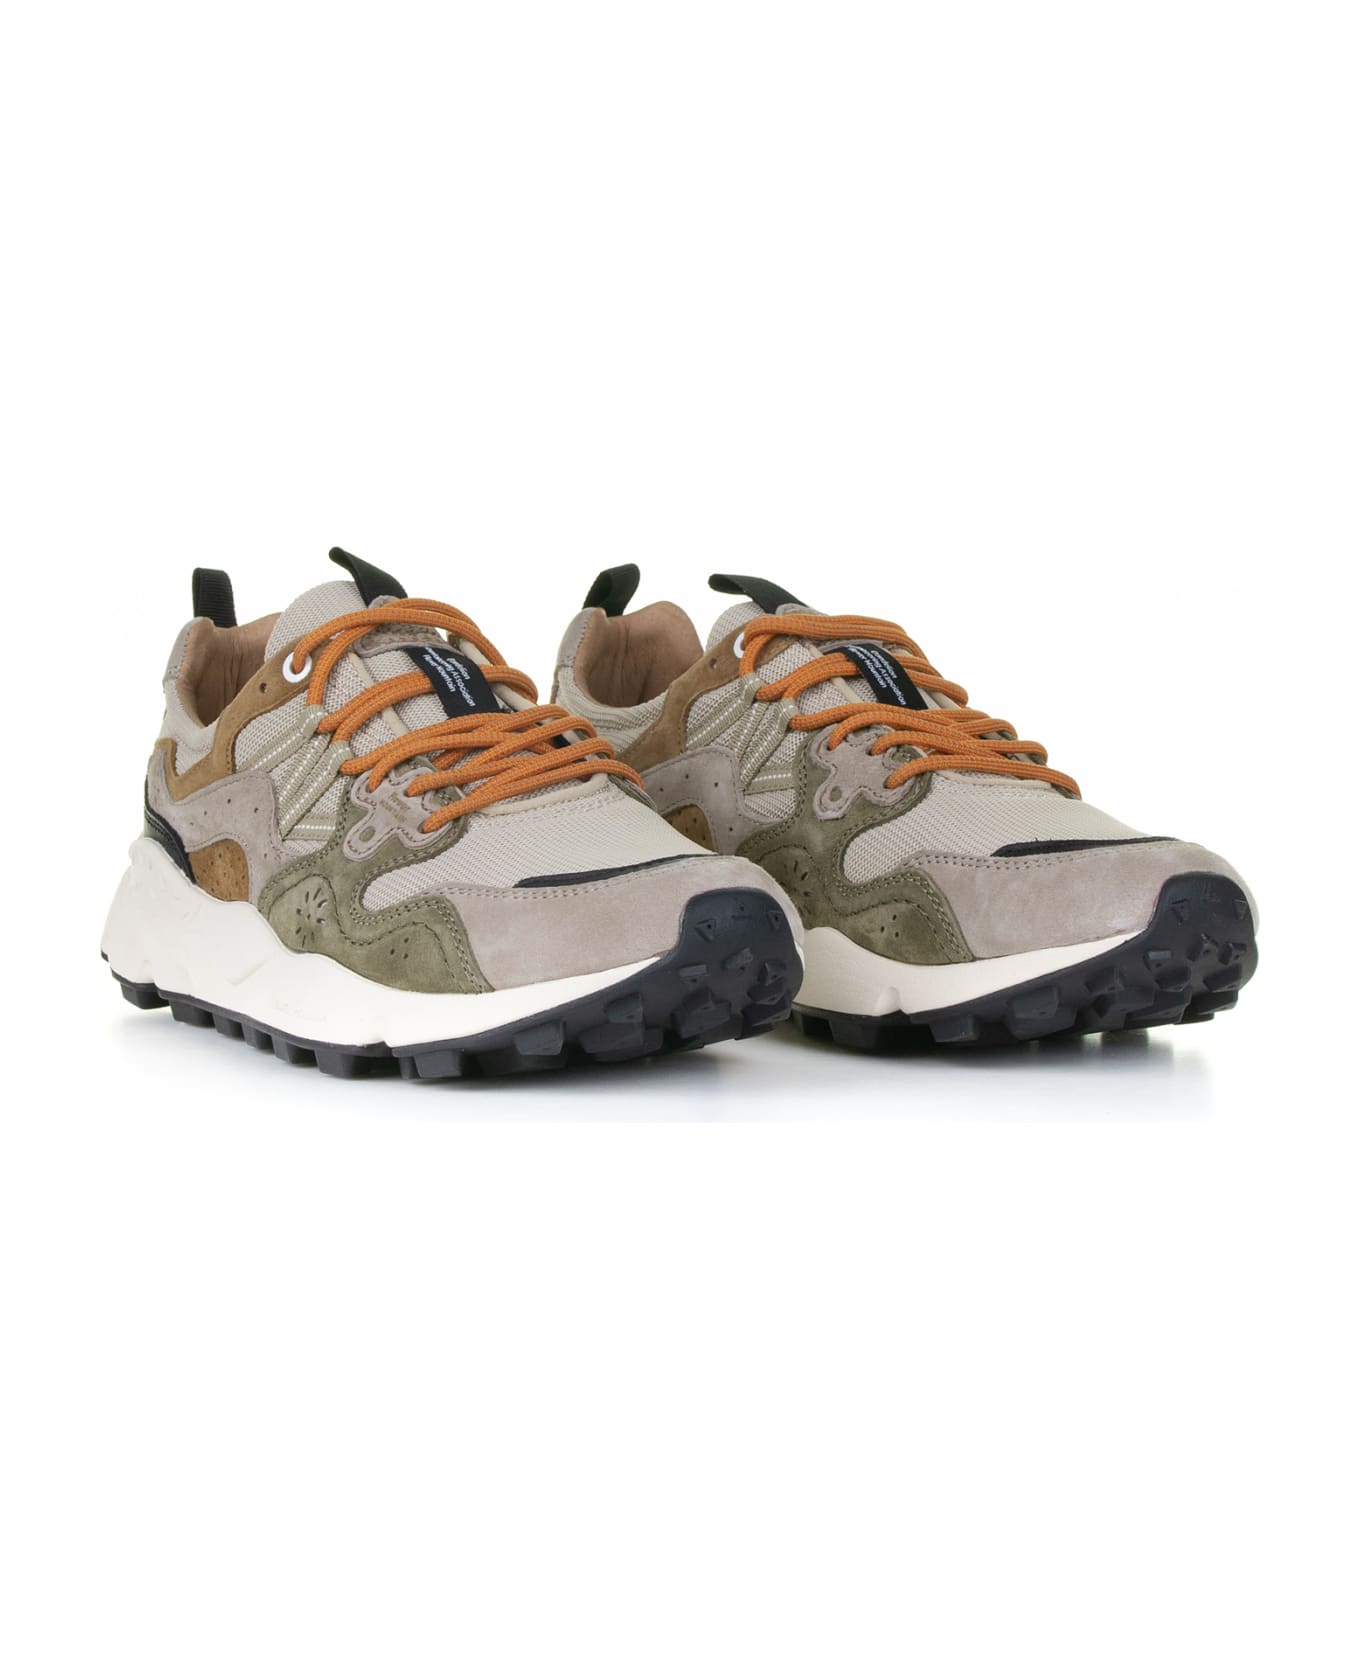 Flower Mountain Yamano Men's Sneaker In Suede And Nylon - SAND MILITARY